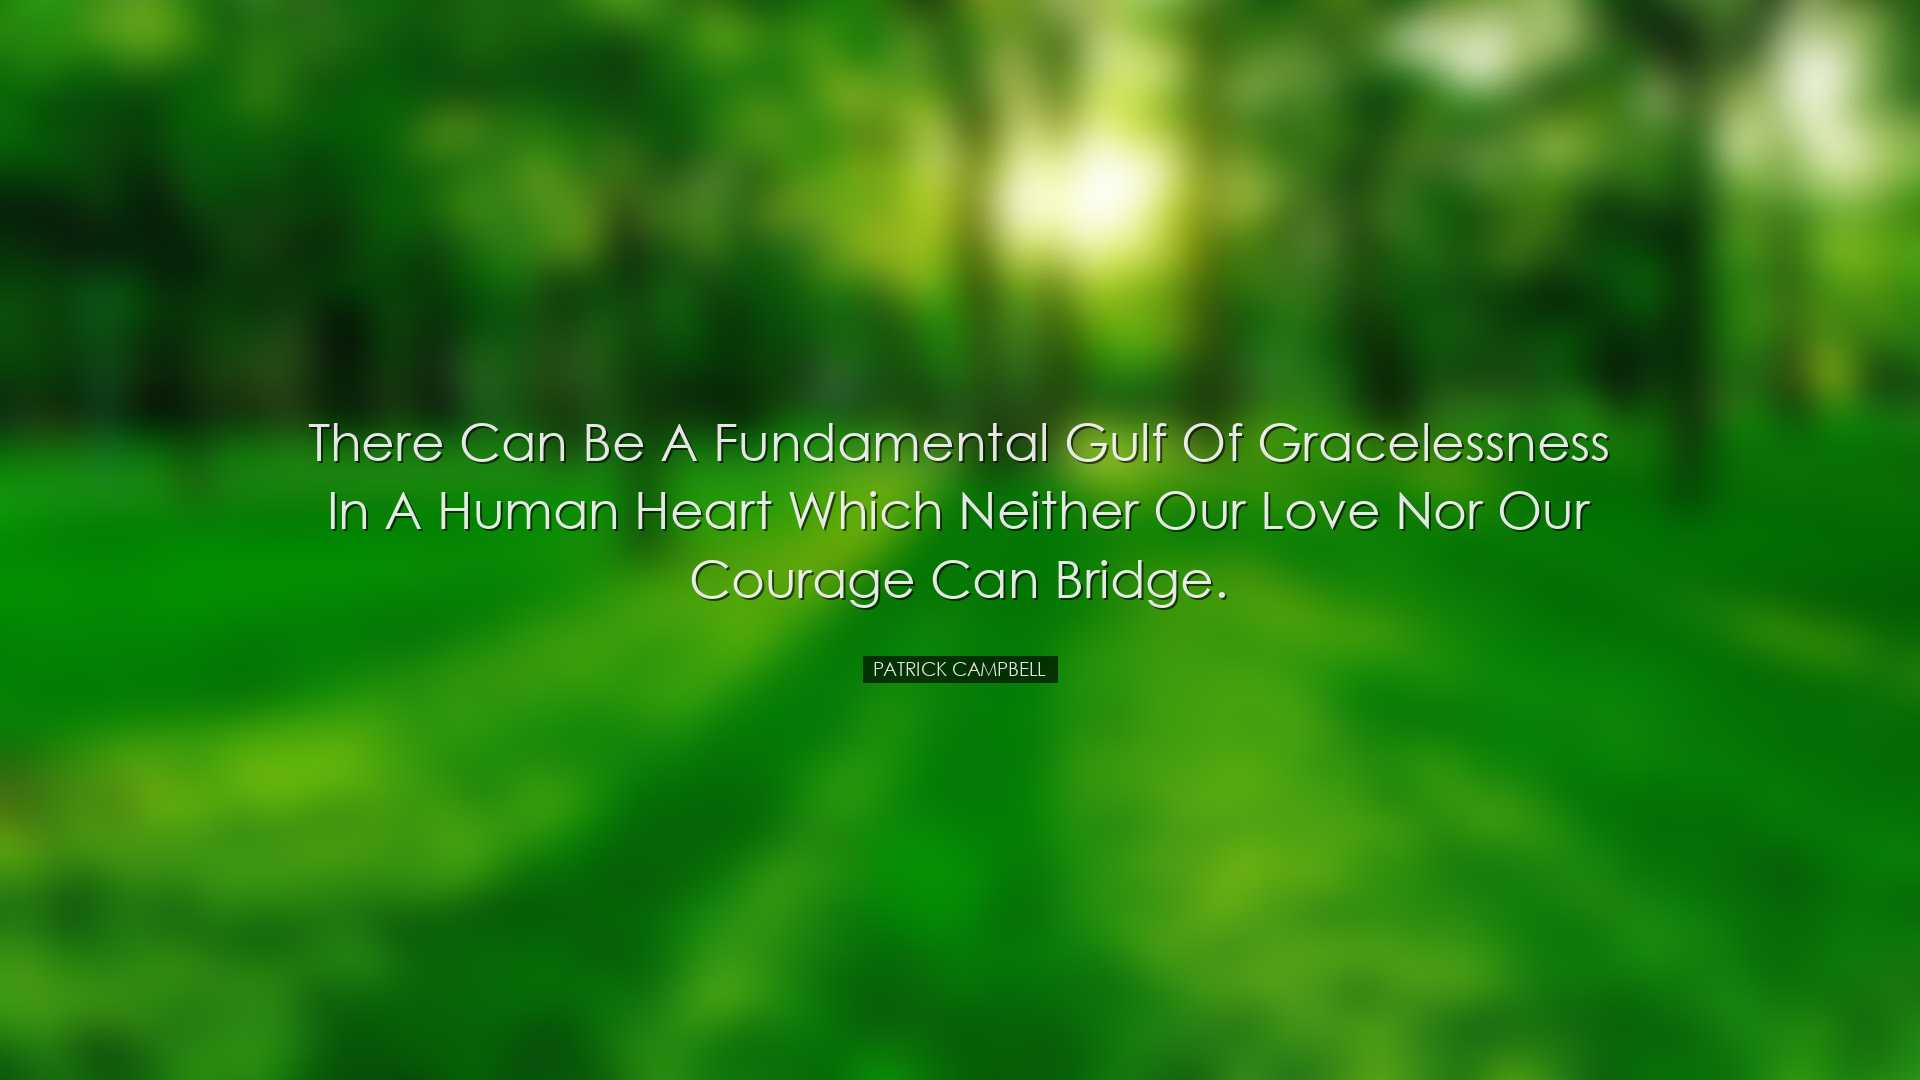 There can be a fundamental gulf of gracelessness in a human heart